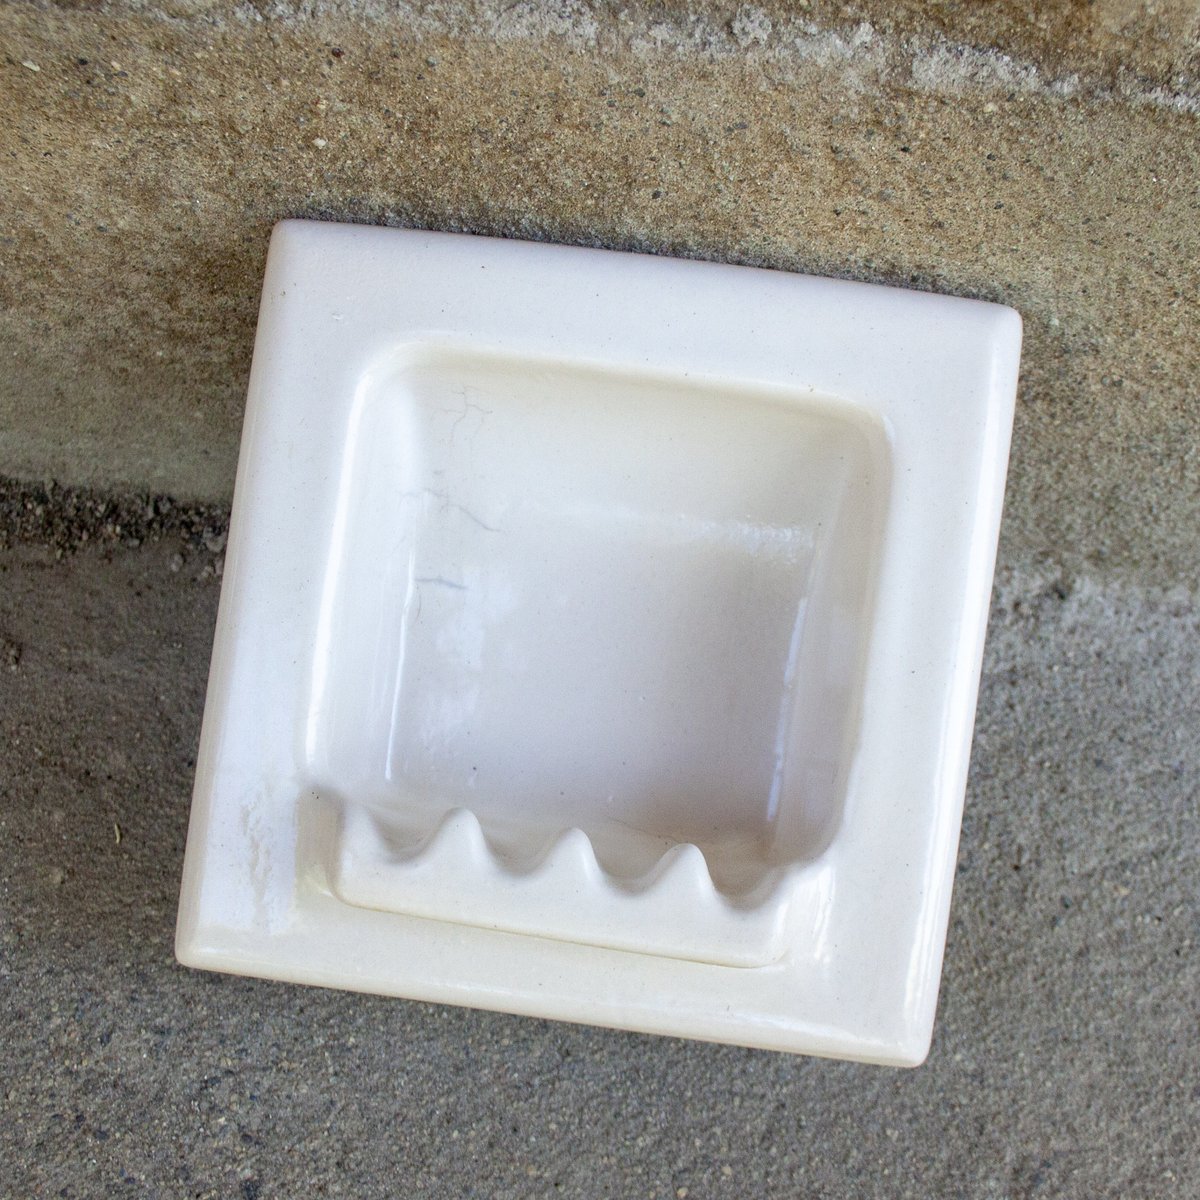 FOR SALE on #etsy: French Mid Century Vintage 1950s/60s White Ceramic Recessed Soap Dish Wall Encased Bathroom etsy.me/2TaRTGt #whitesoapdish #frenchvintage #bathroomfixtures #bathroomfittings #vintagebathroom #mcmbathroom #TimeCapsuleBathroom #RecessedSoapDish